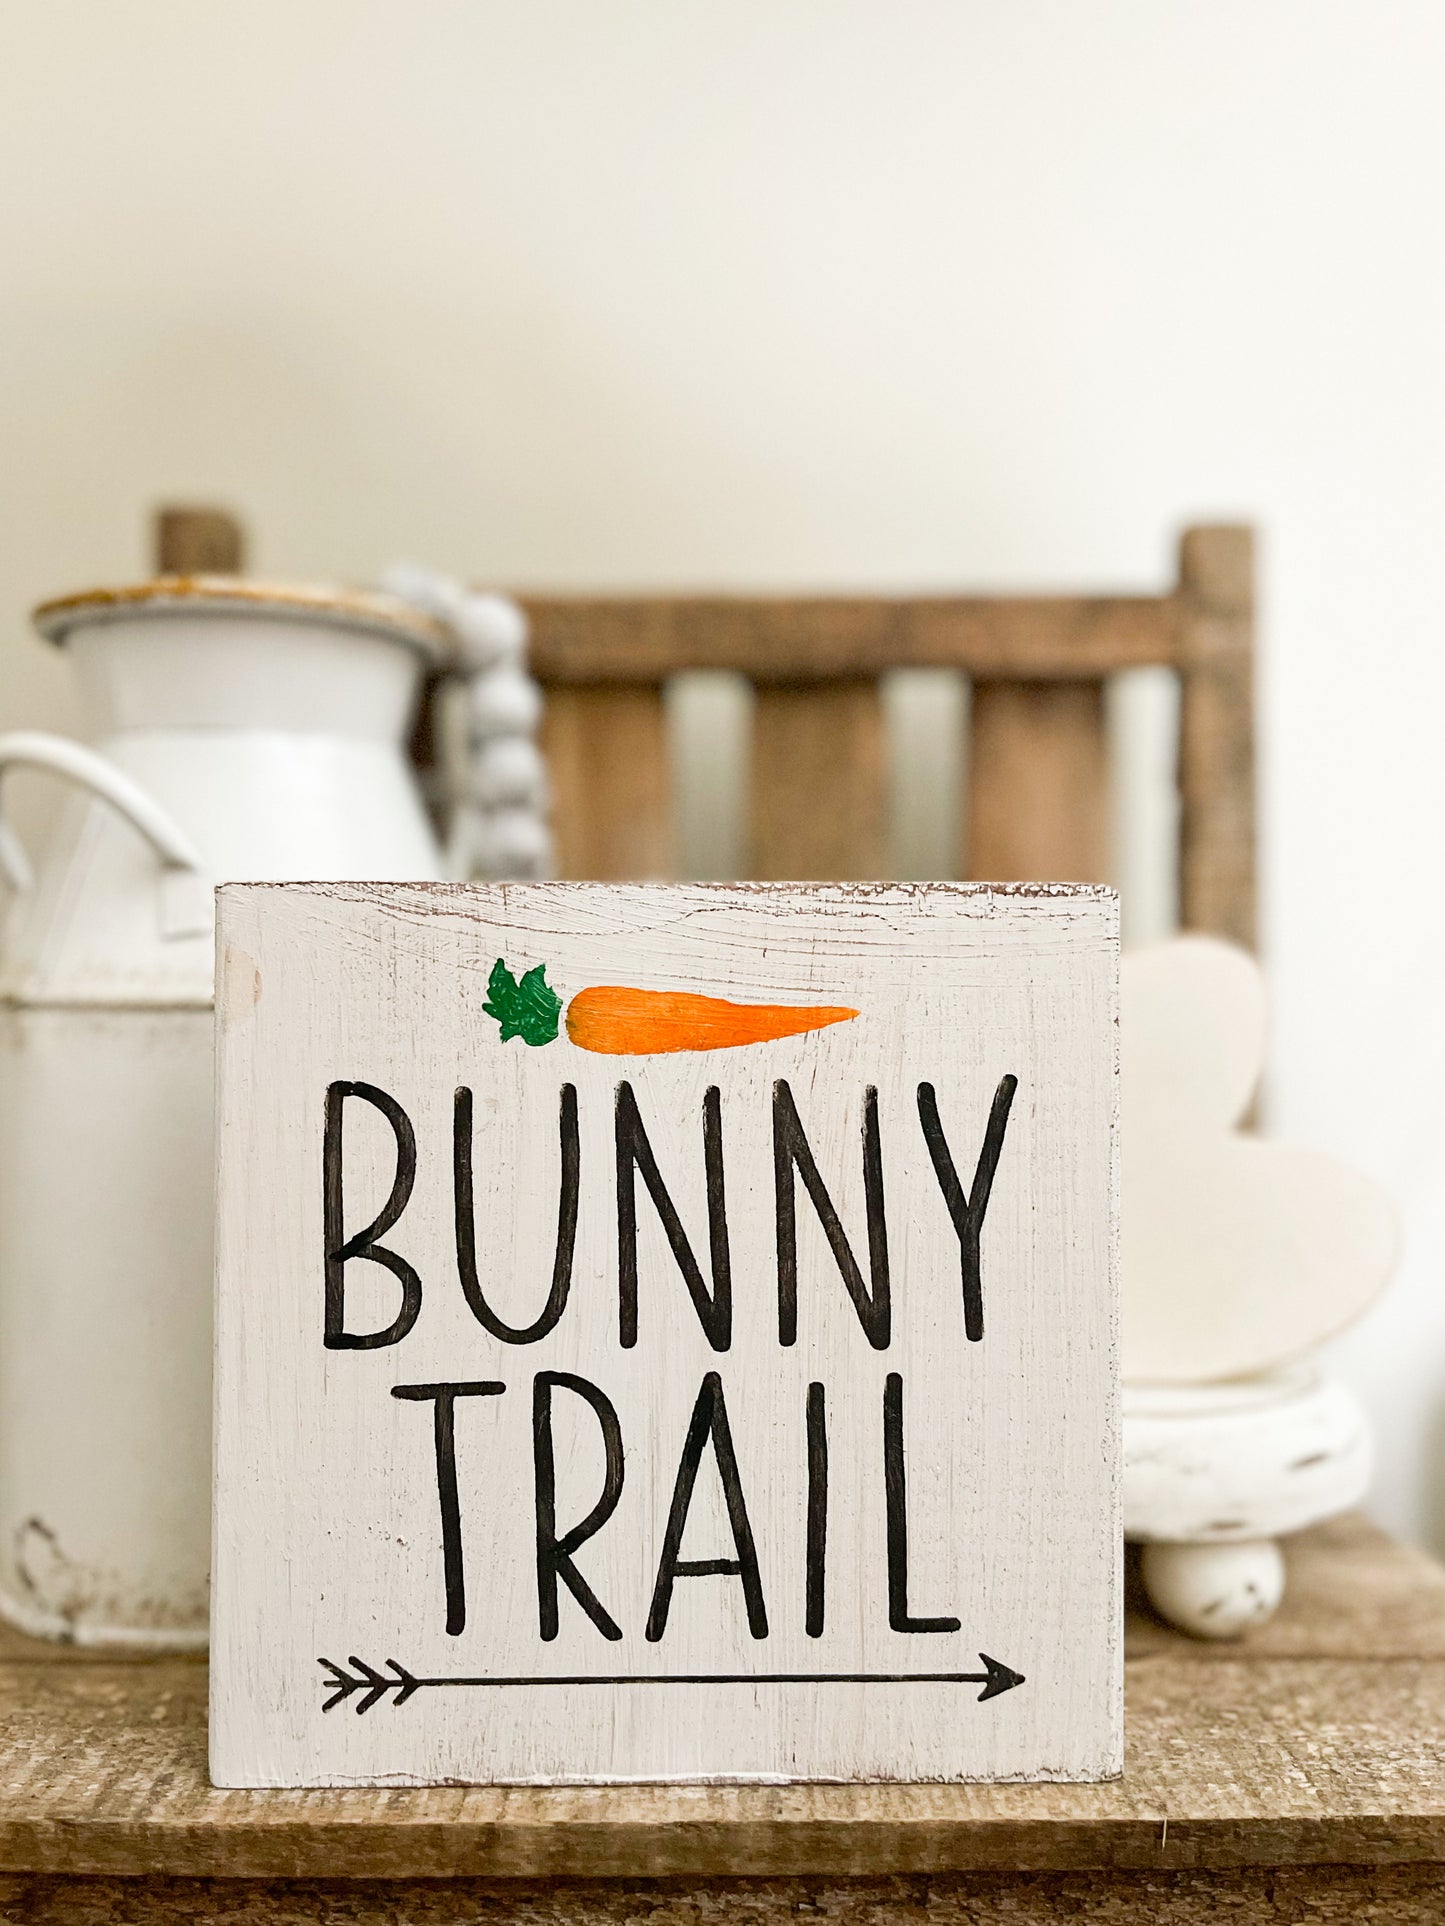 Bunny Trail Wood Sign